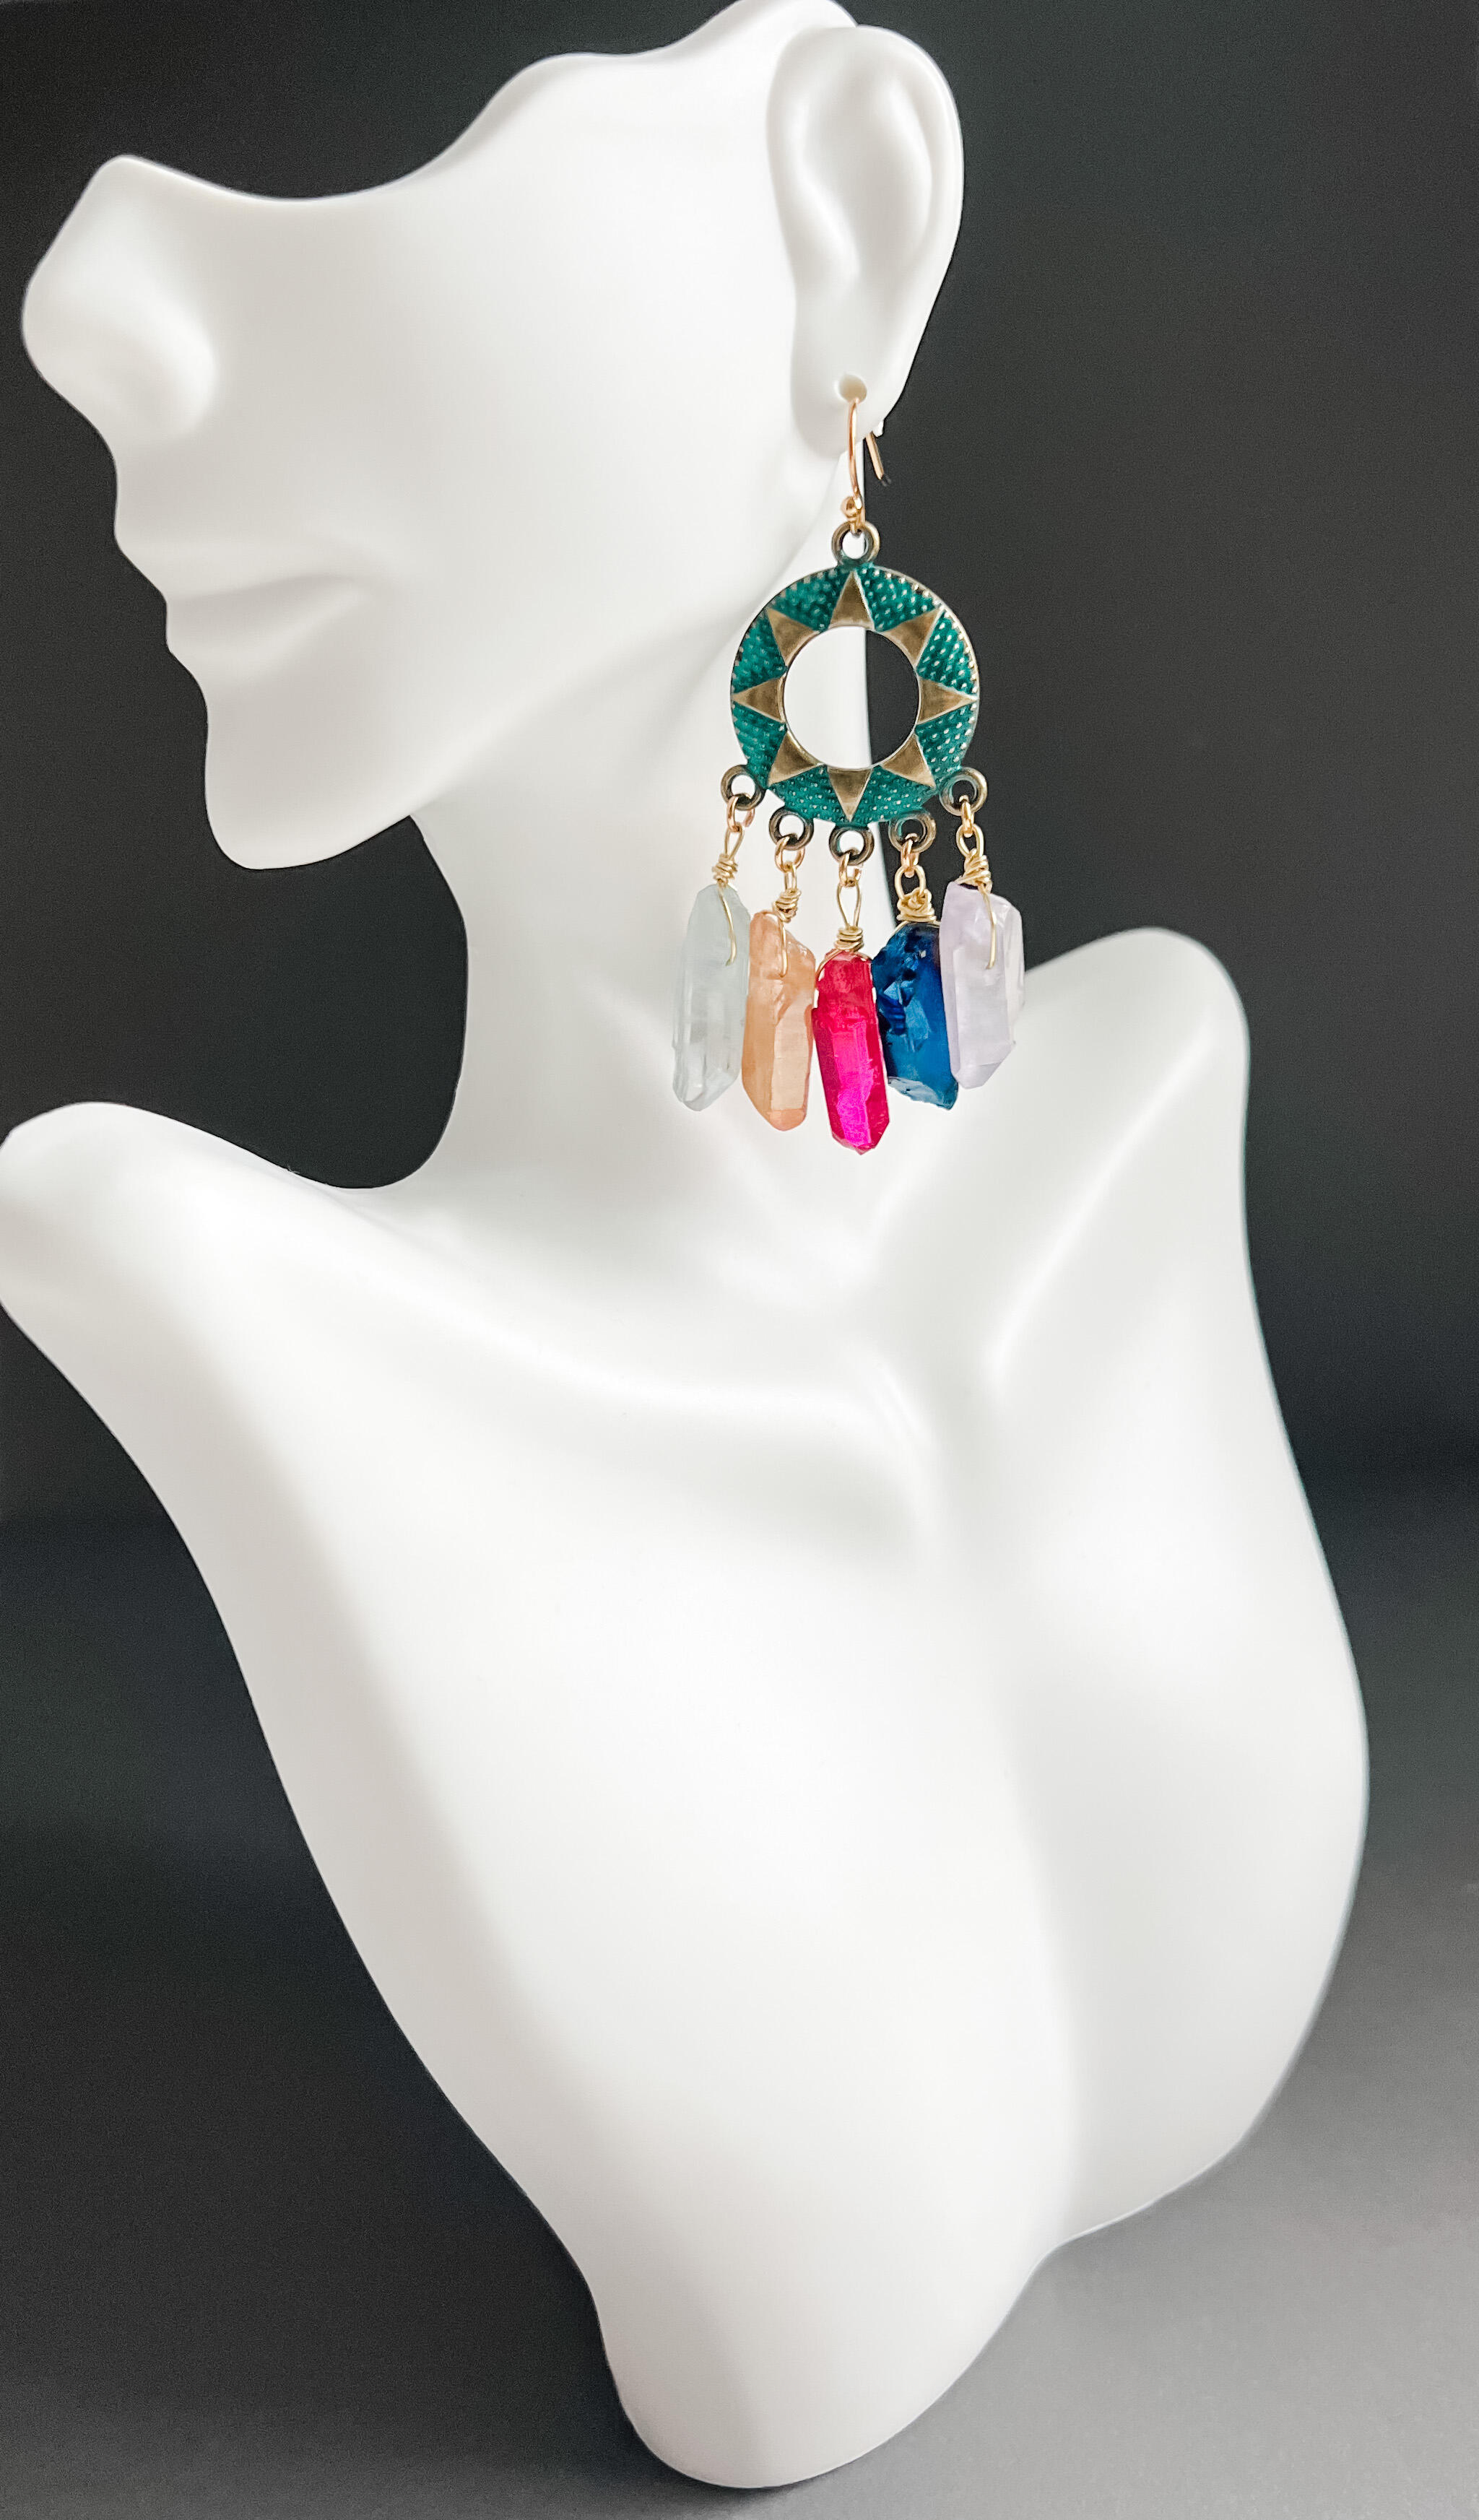 Mismatched earrings made in heaven